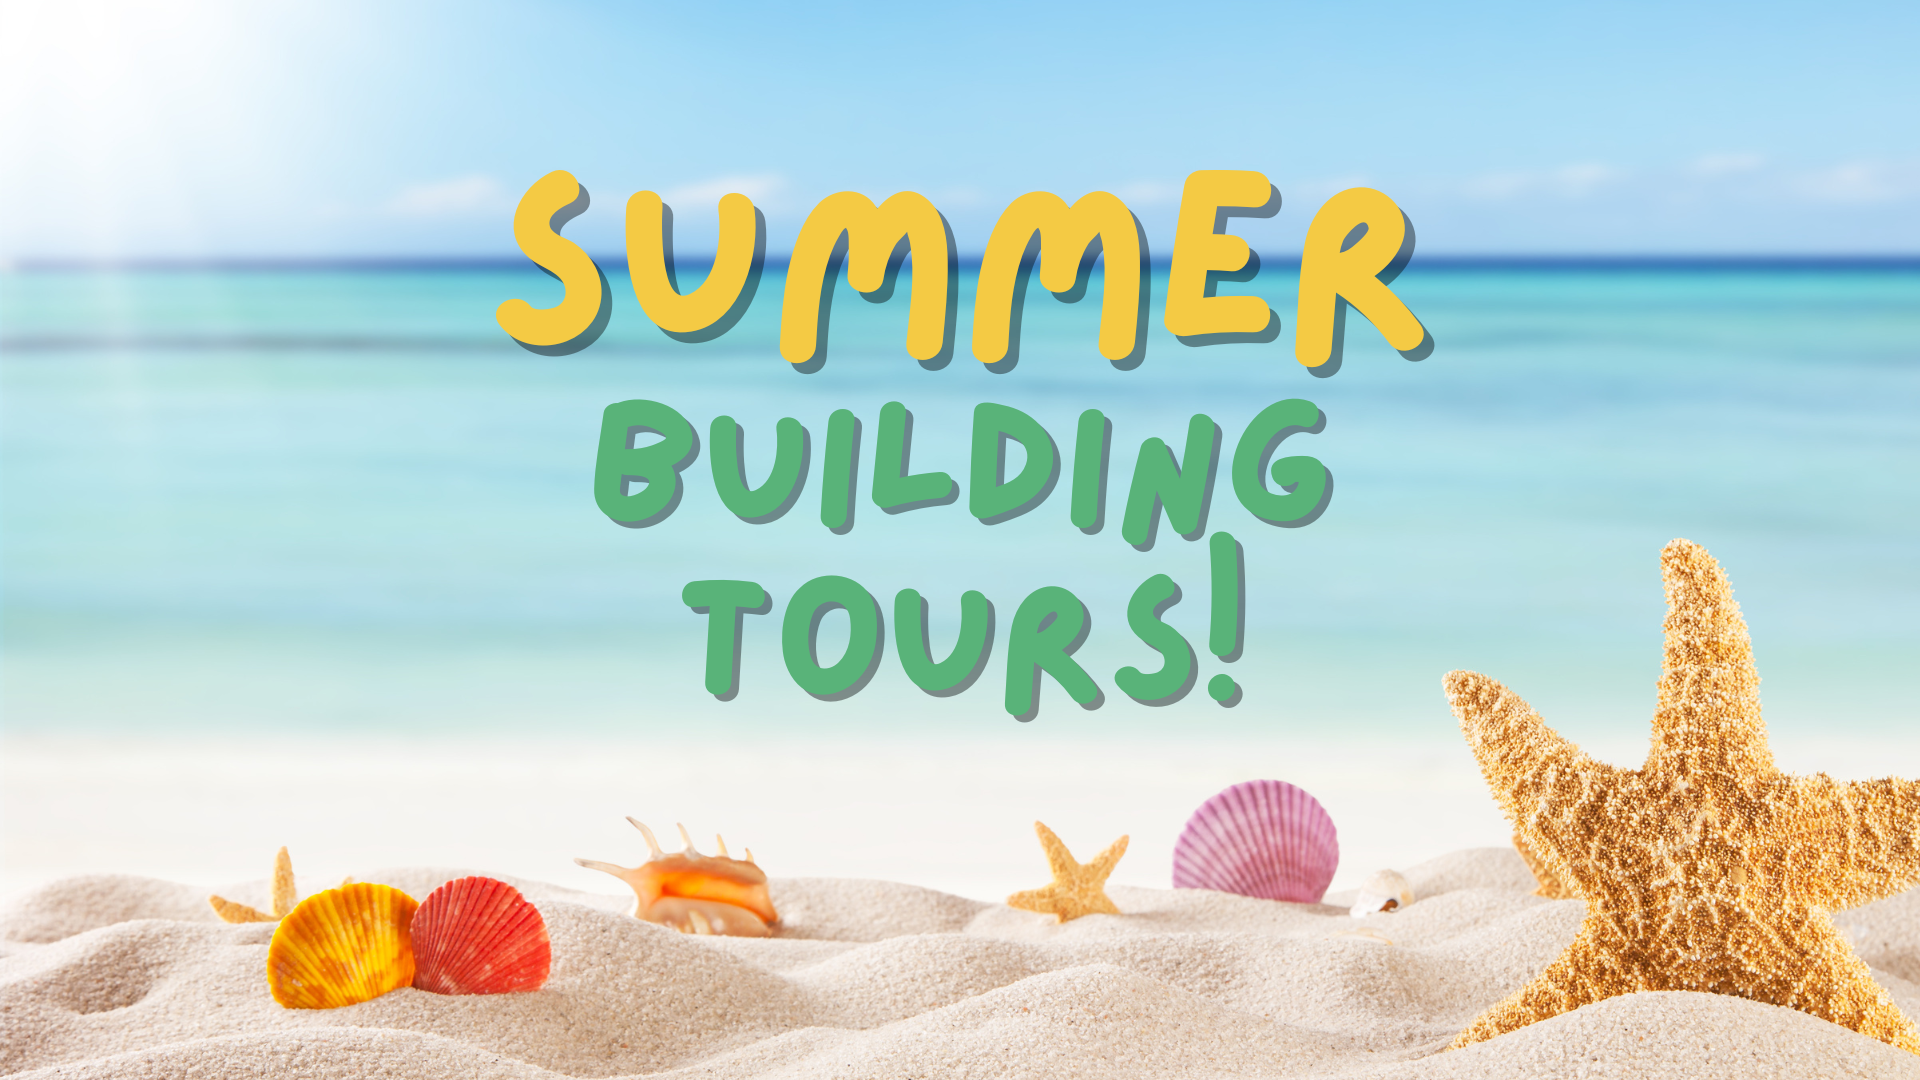 text says summer building tours, background is a beach with shells